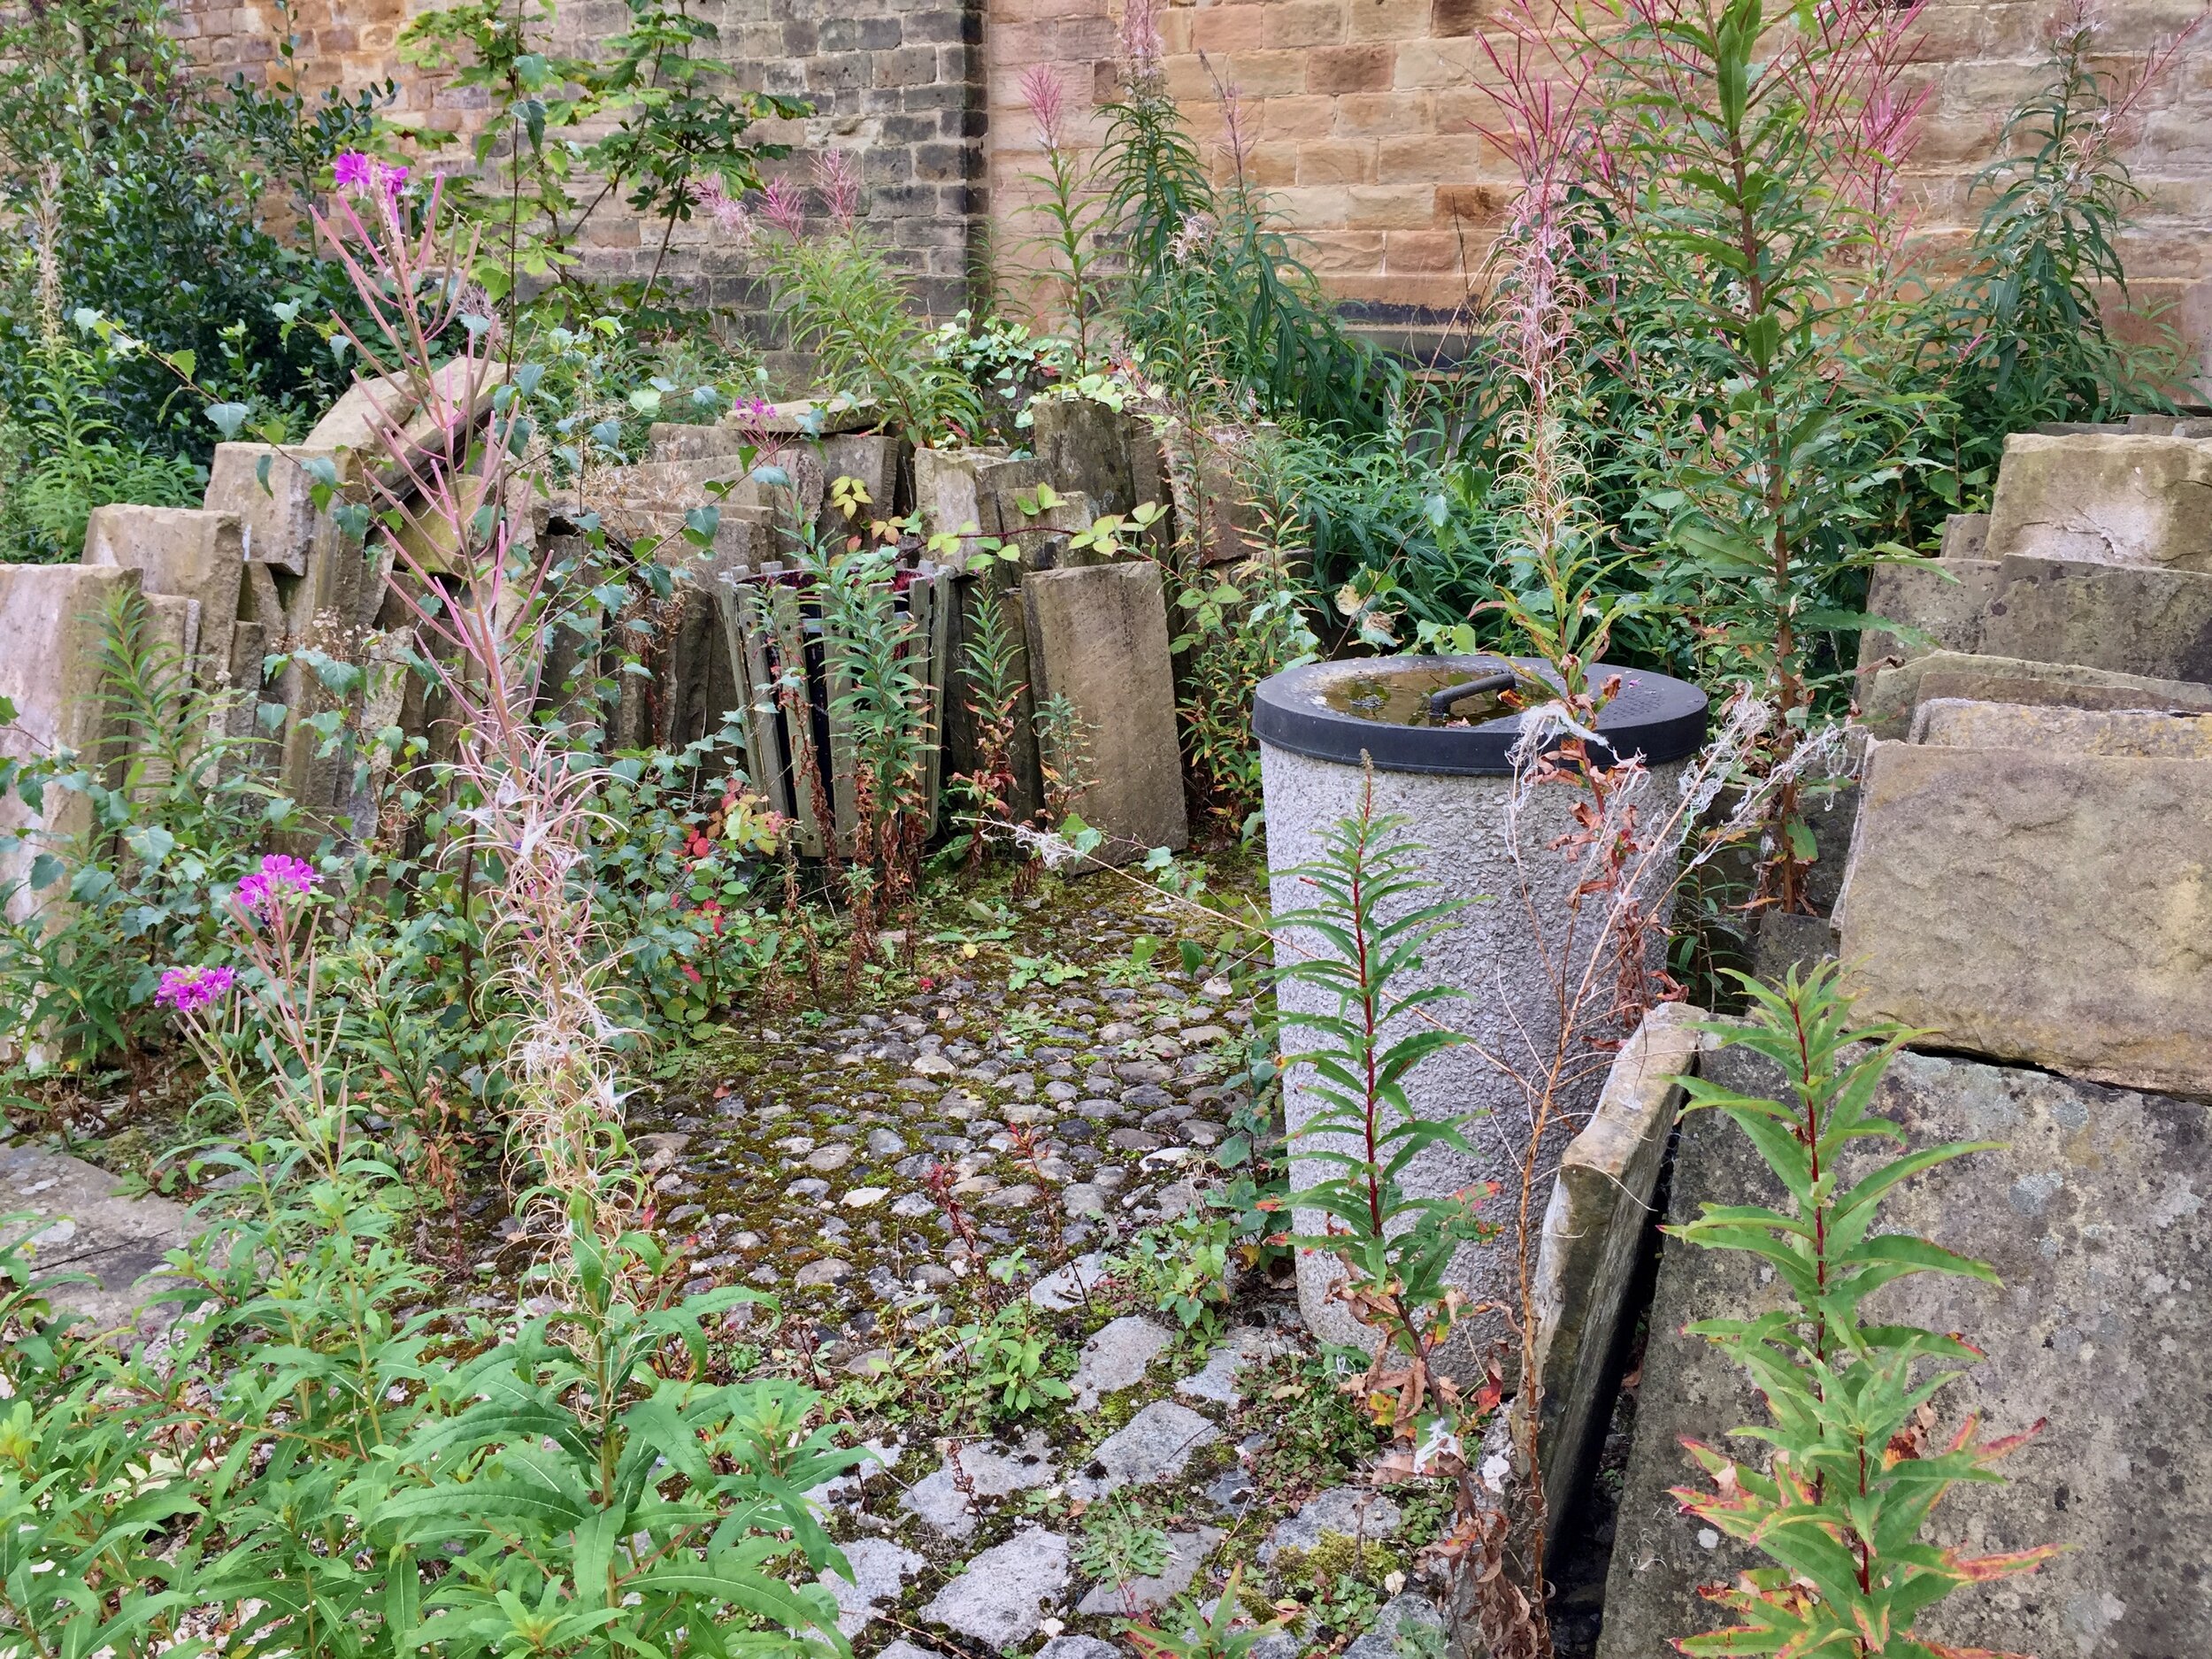  Bins through the ages, sitting amongst the preserved paving slabs and rosebay willow herb. 